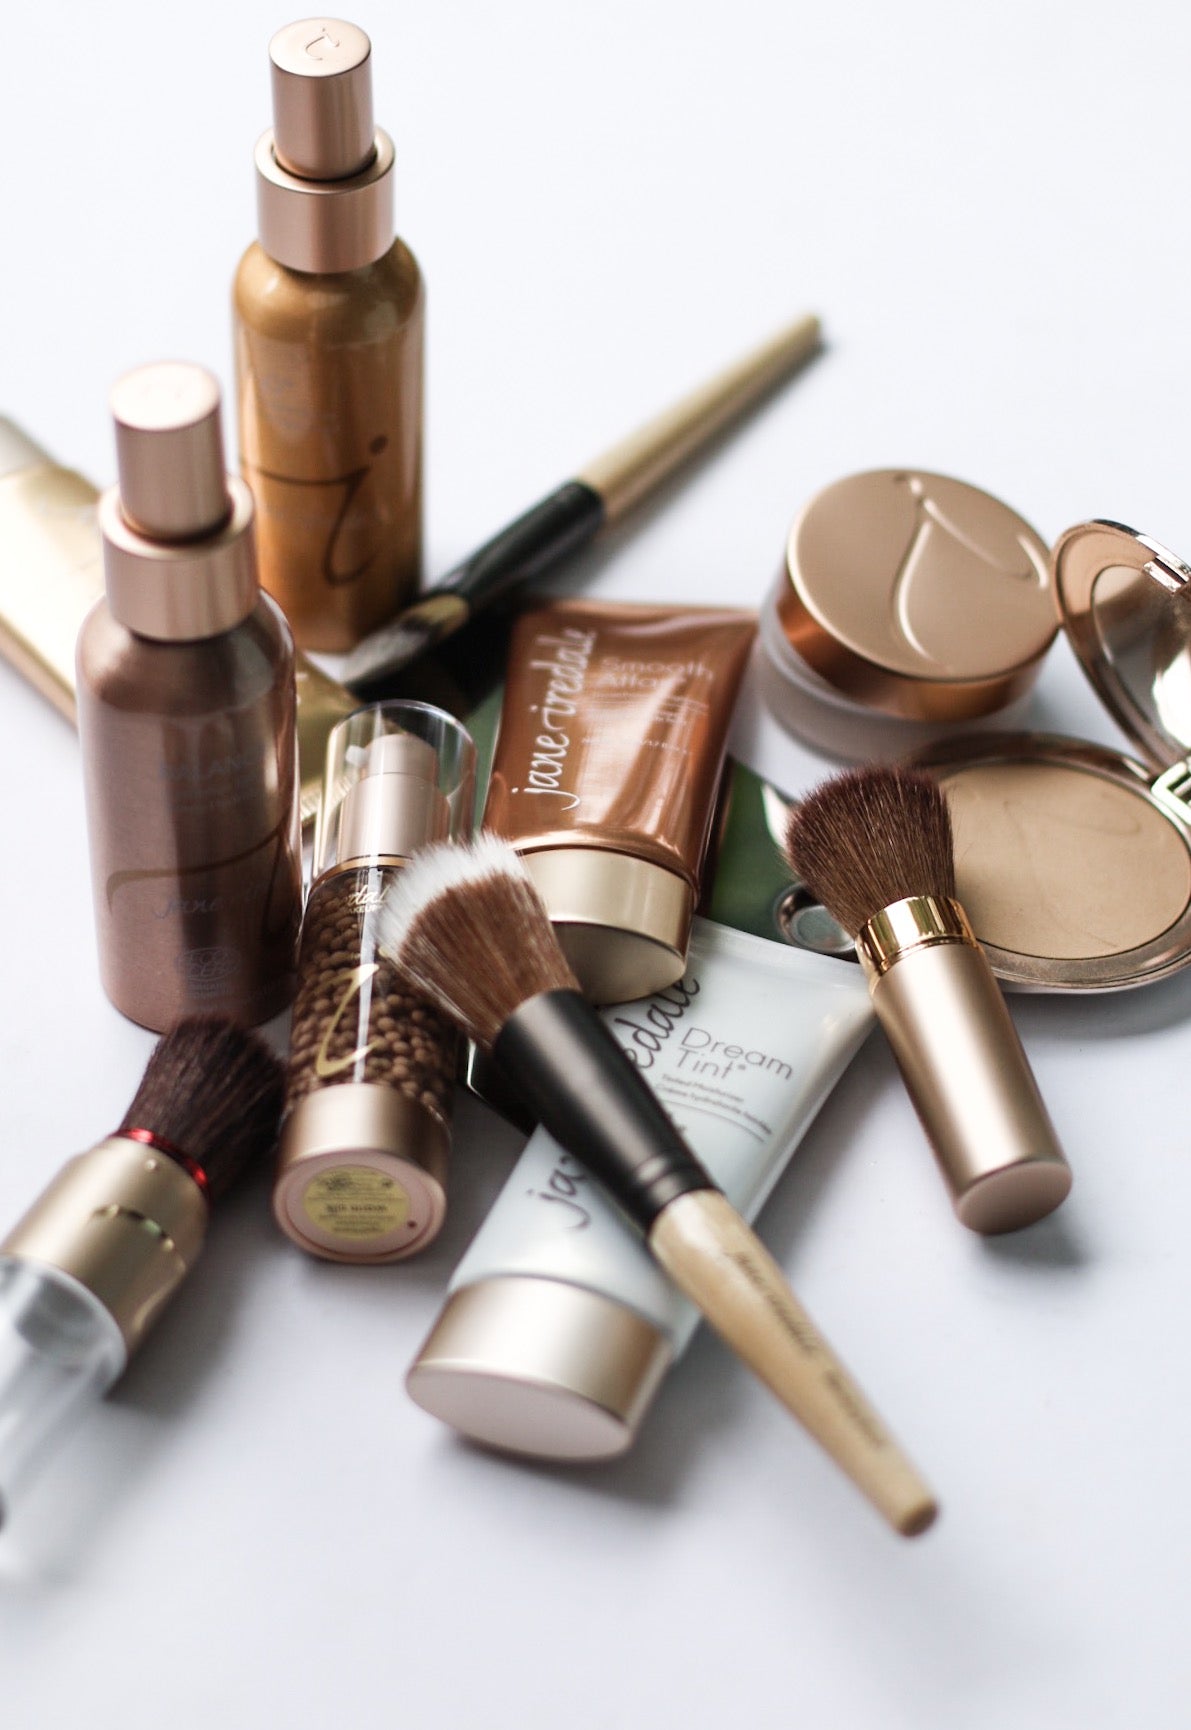 jane iredale product group shot